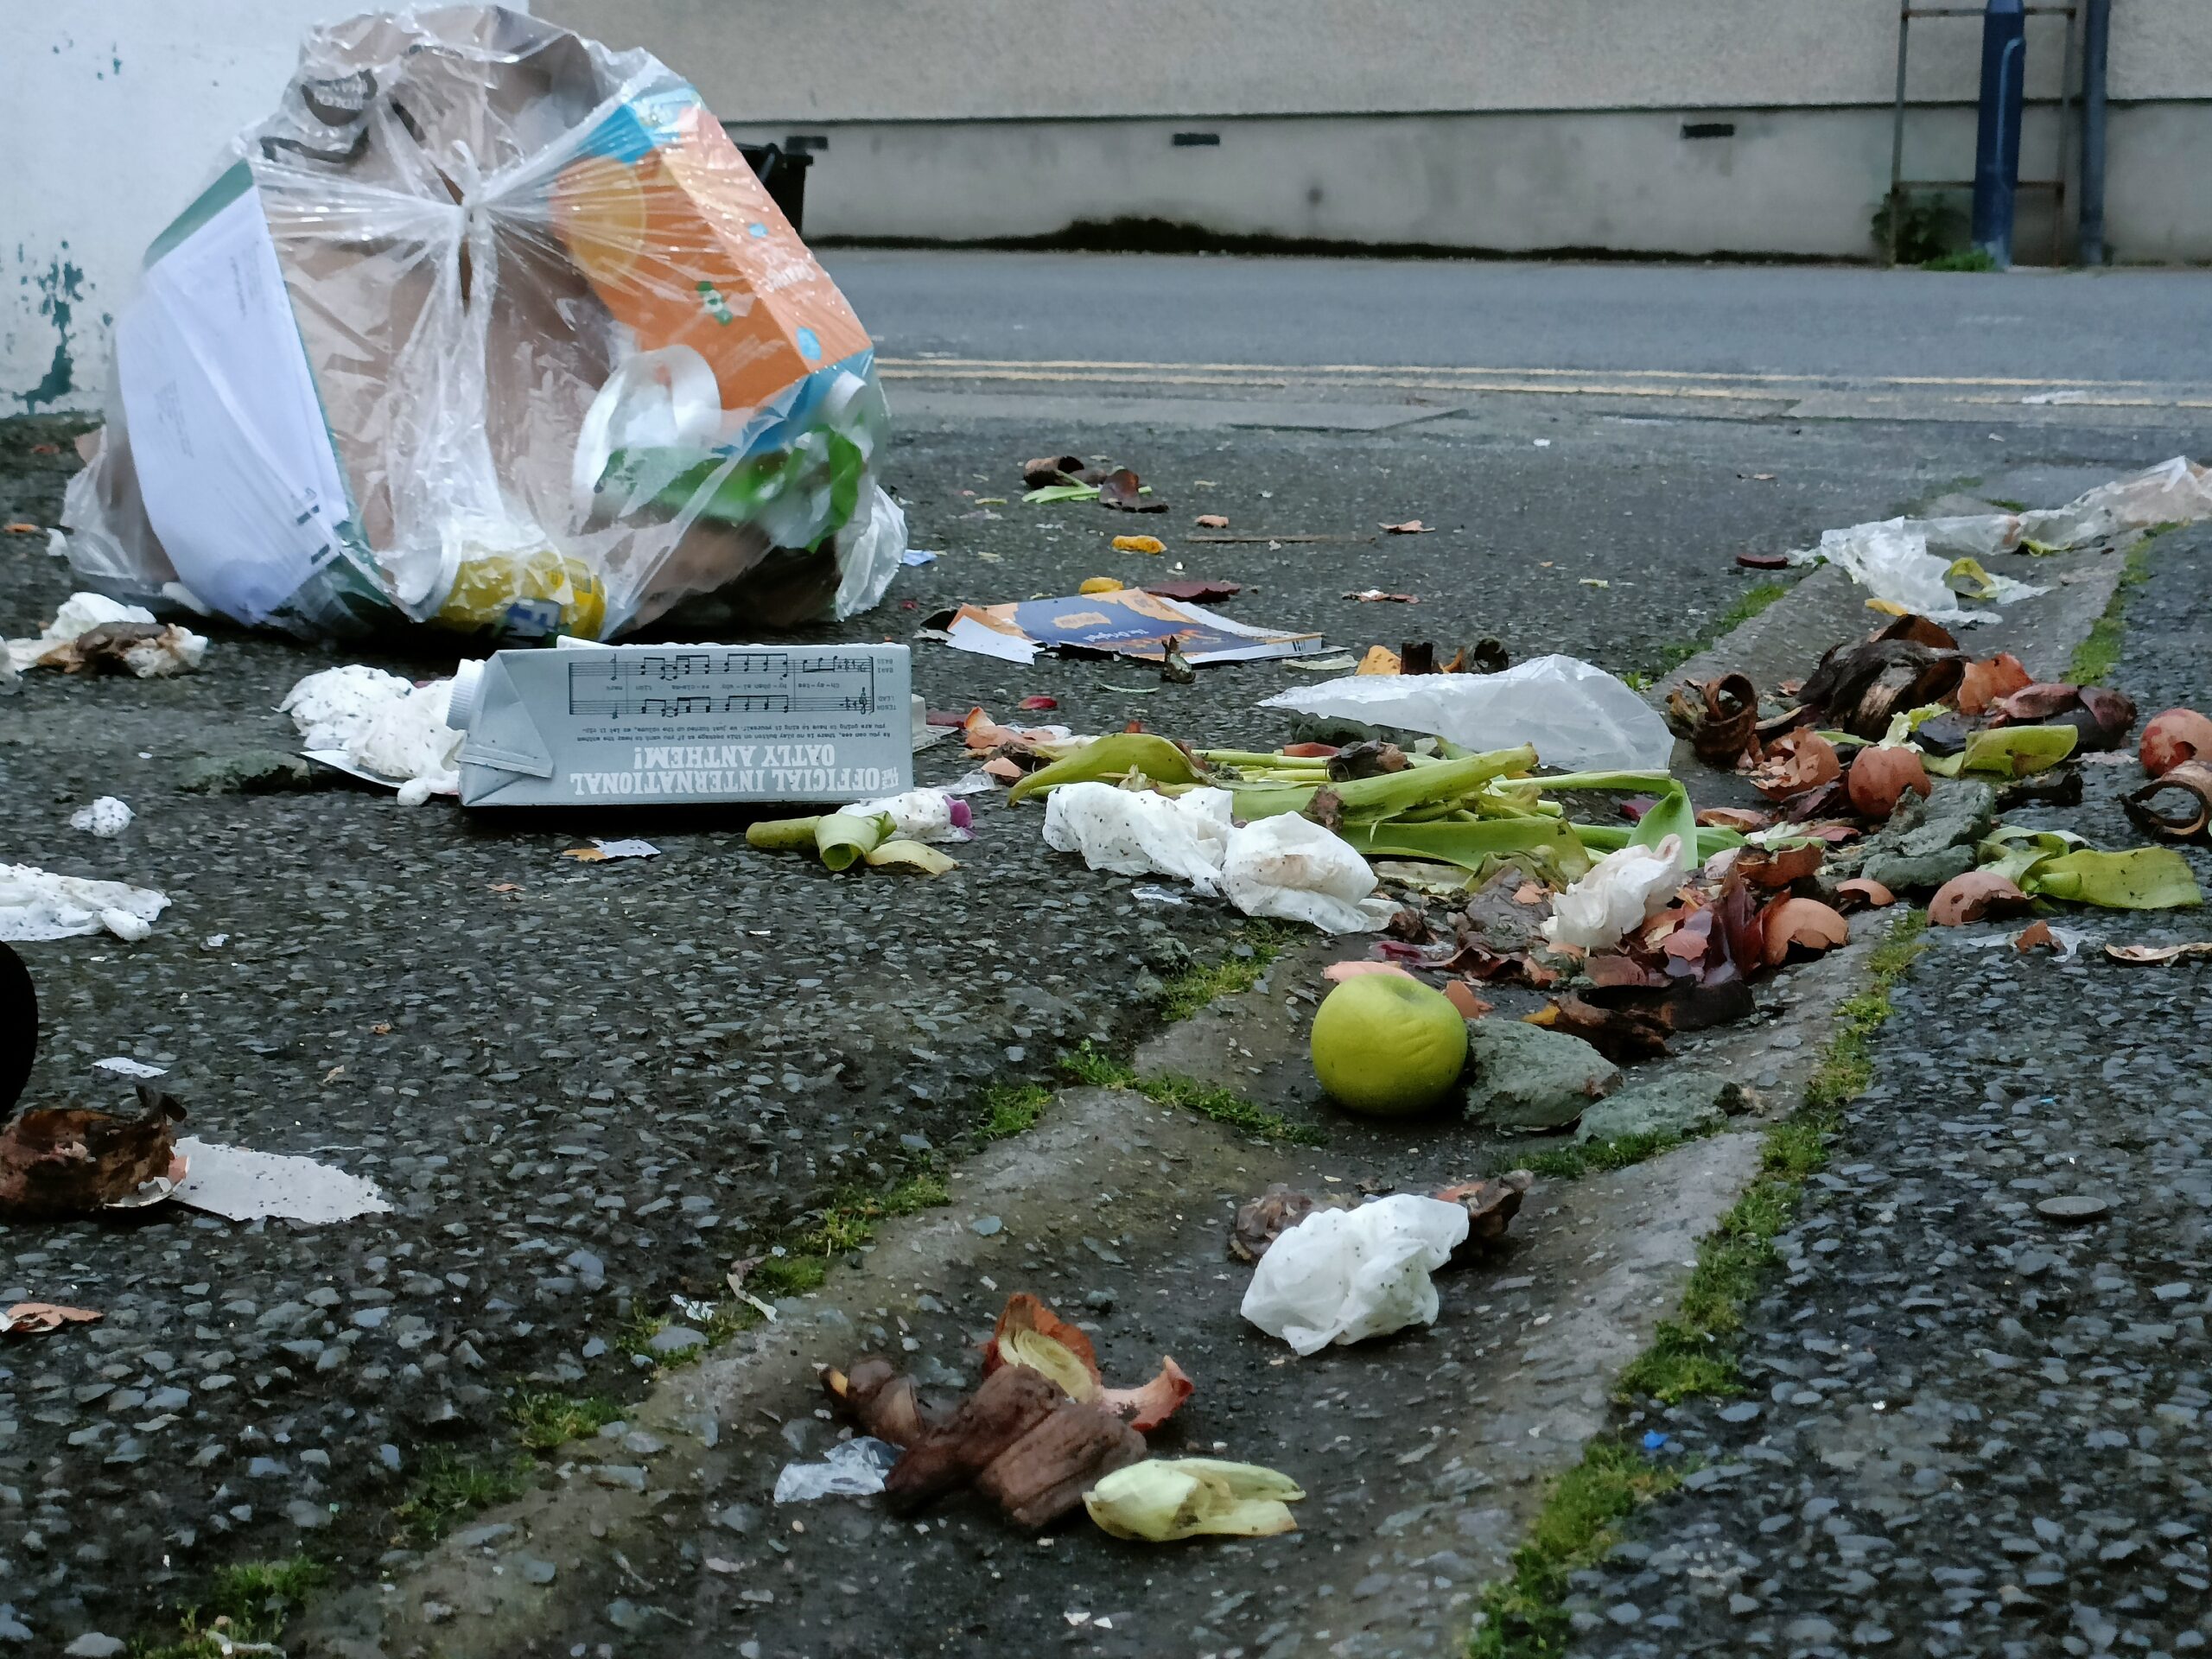 £2,550 in fixed penalty notices for littering and other environmental offences issued during December